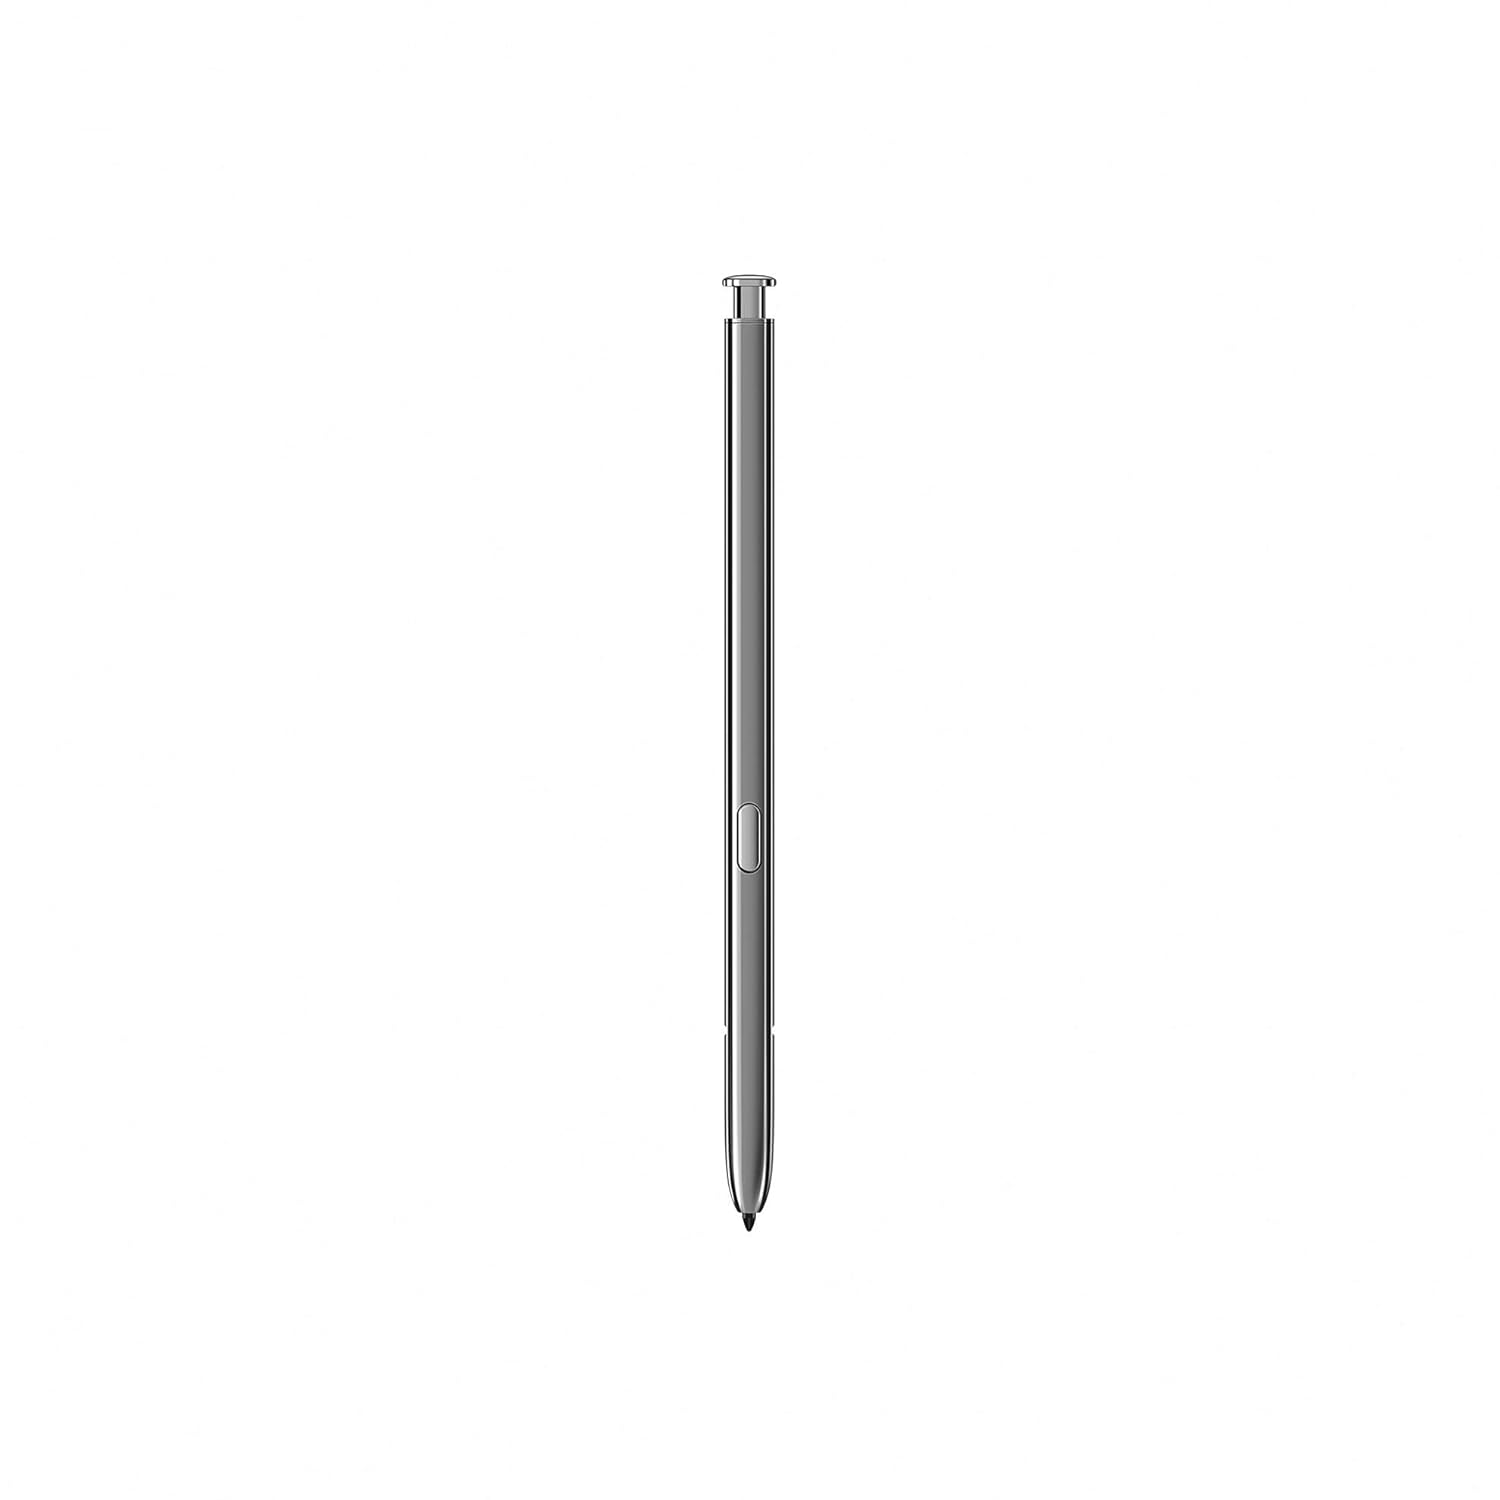 Samsung Official Galaxy Note 20 & Note 20 Ultra S Pen with Bluetooth (Gray)